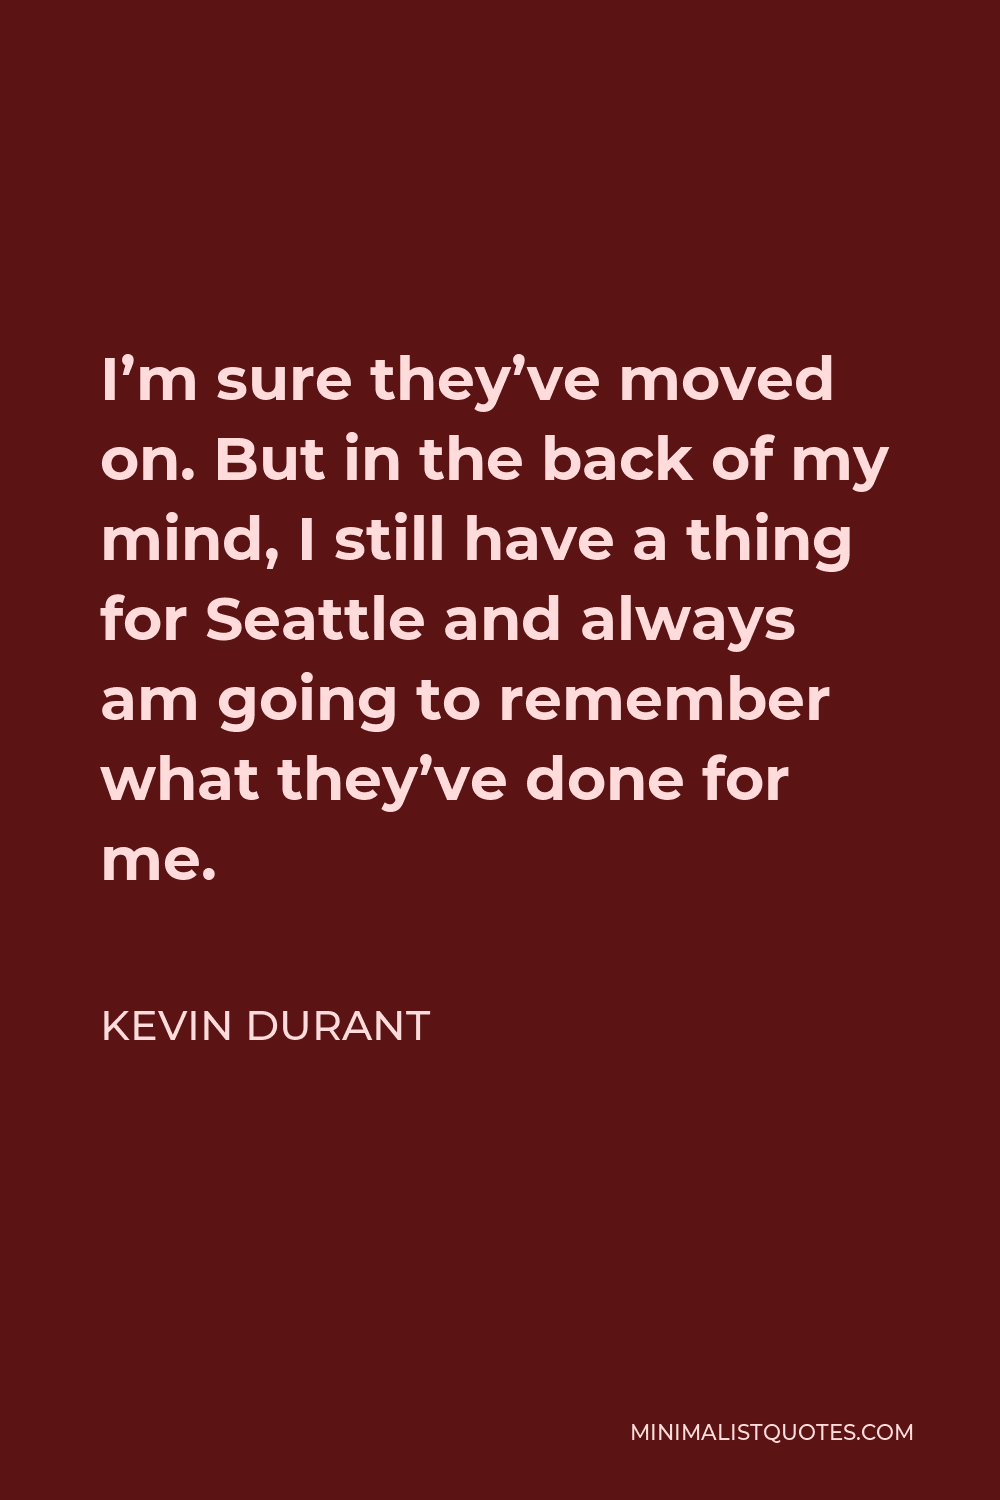 Kevin Durant Quote - I’m sure they’ve moved on. But in the back of my mind, I still have a thing for Seattle and always am going to remember what they’ve done for me.